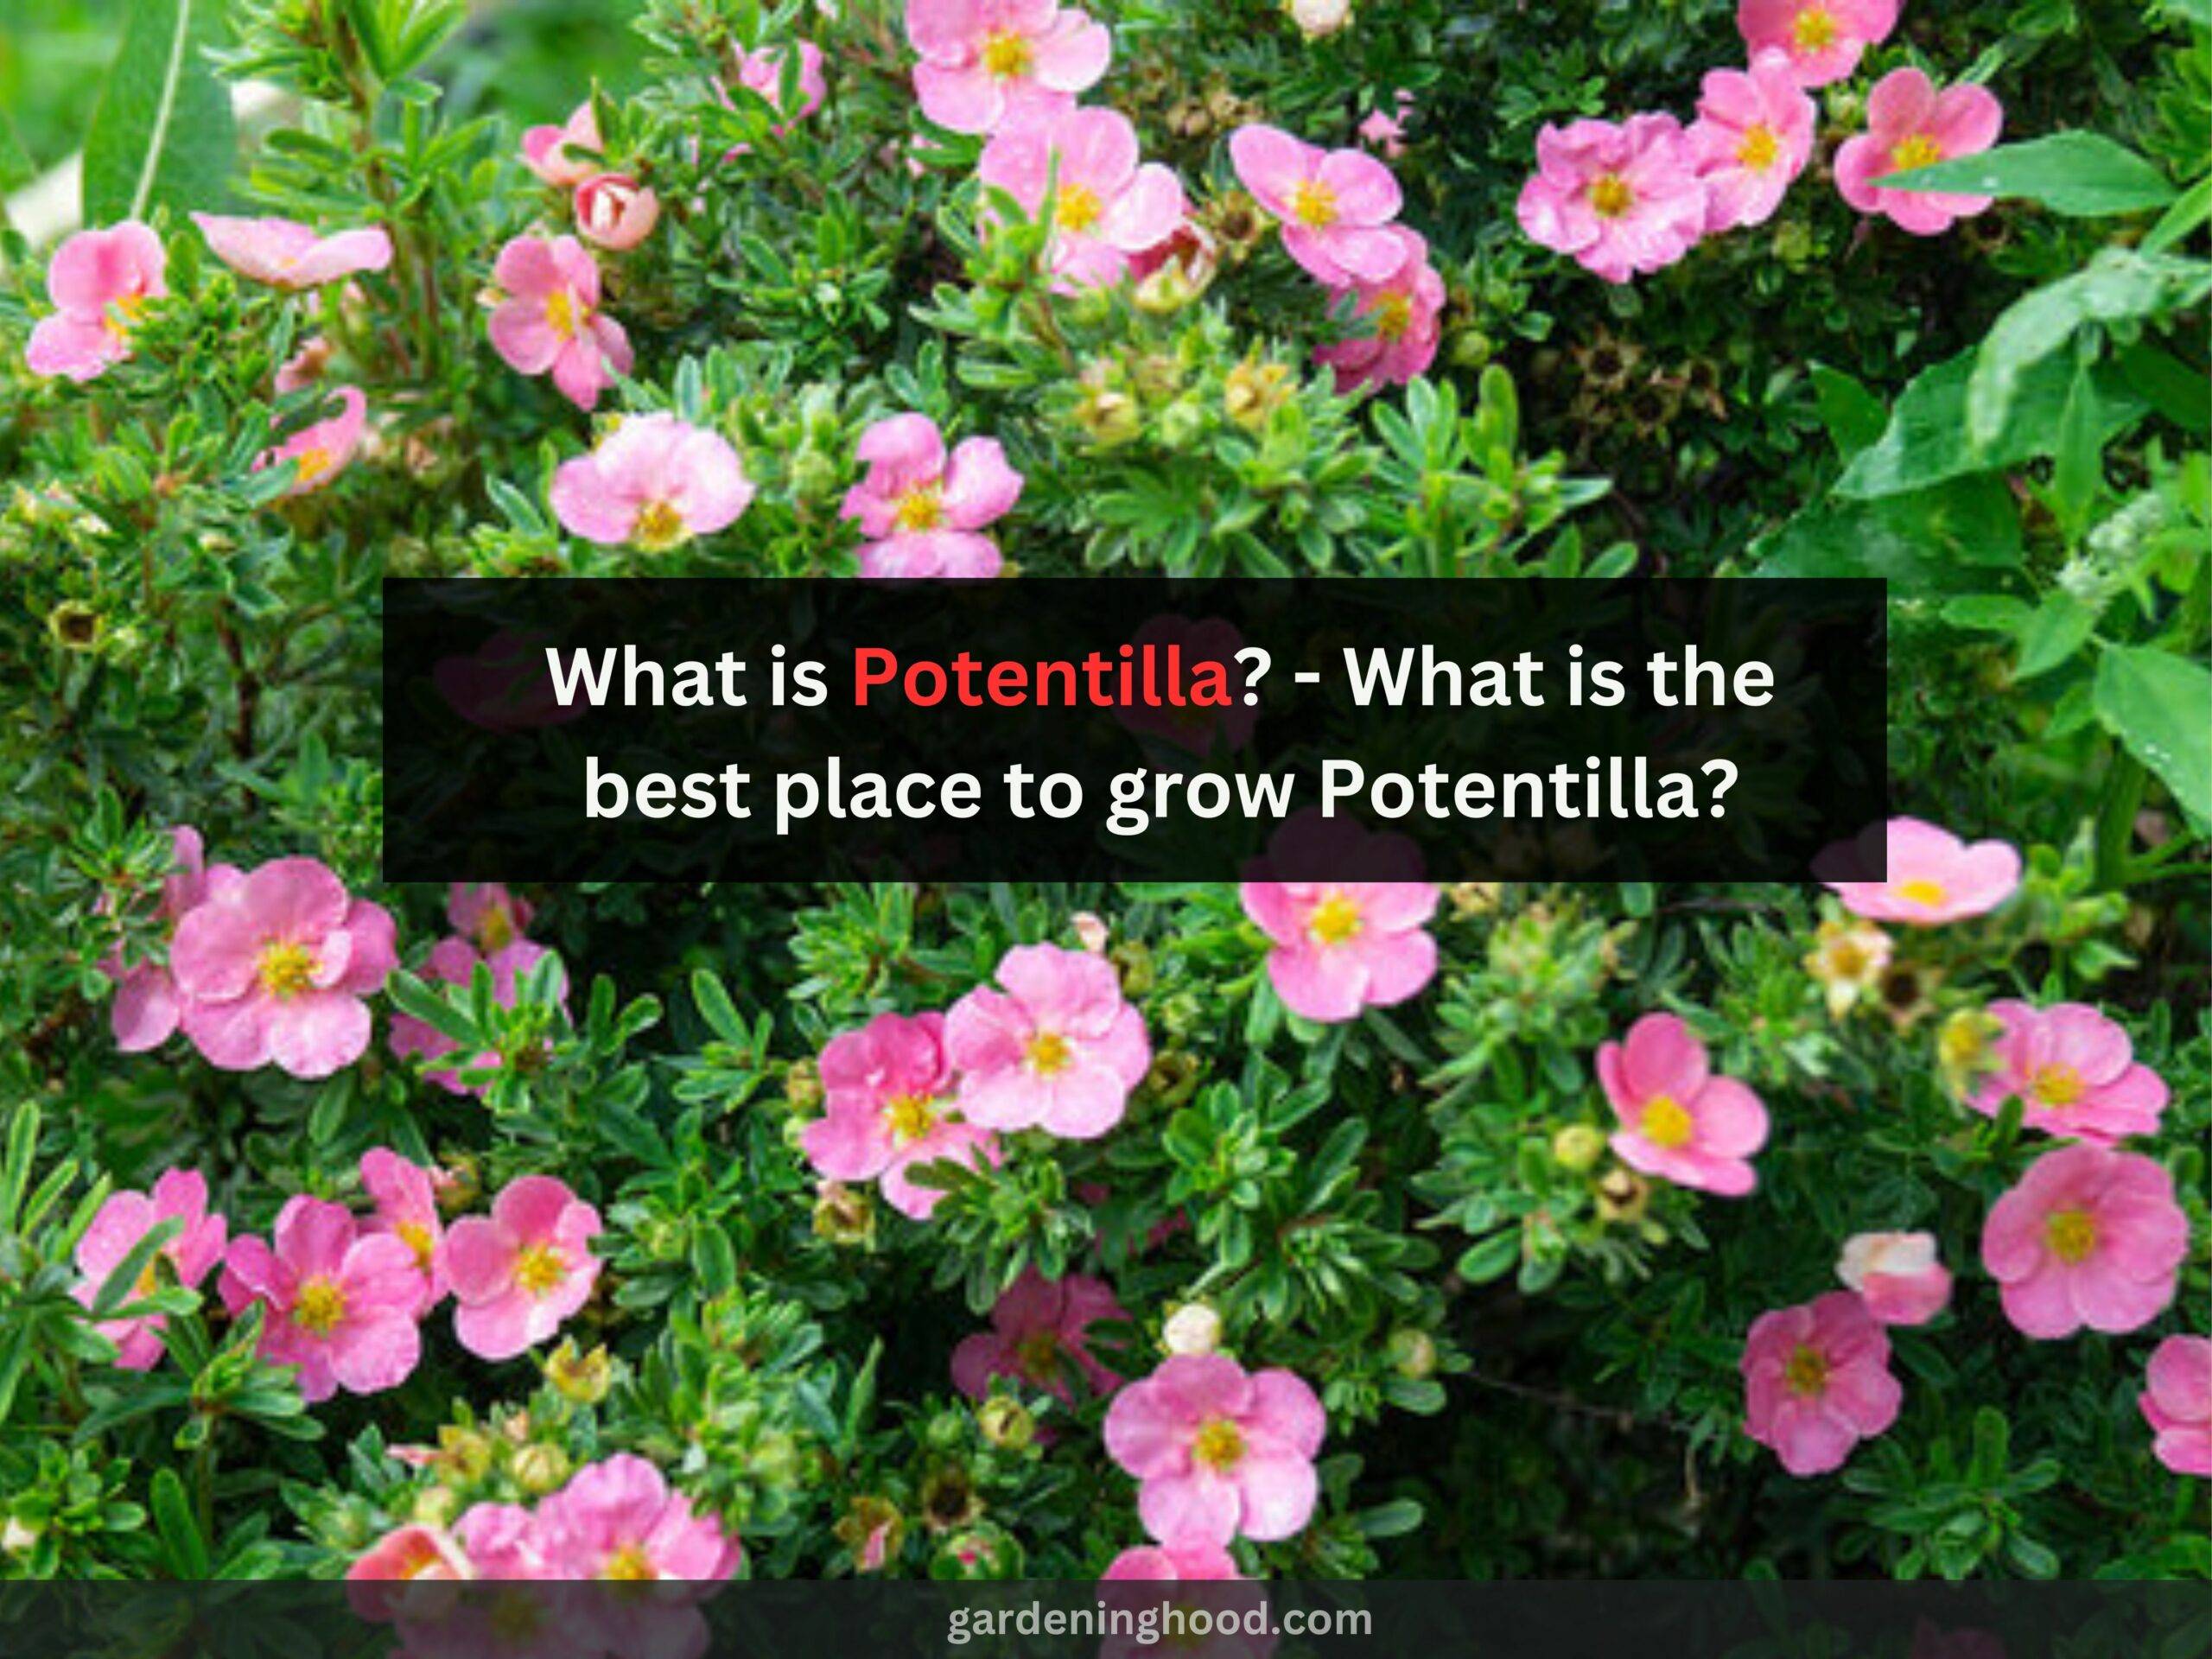 What is Potentilla? - What is the best place to grow Potentilla?